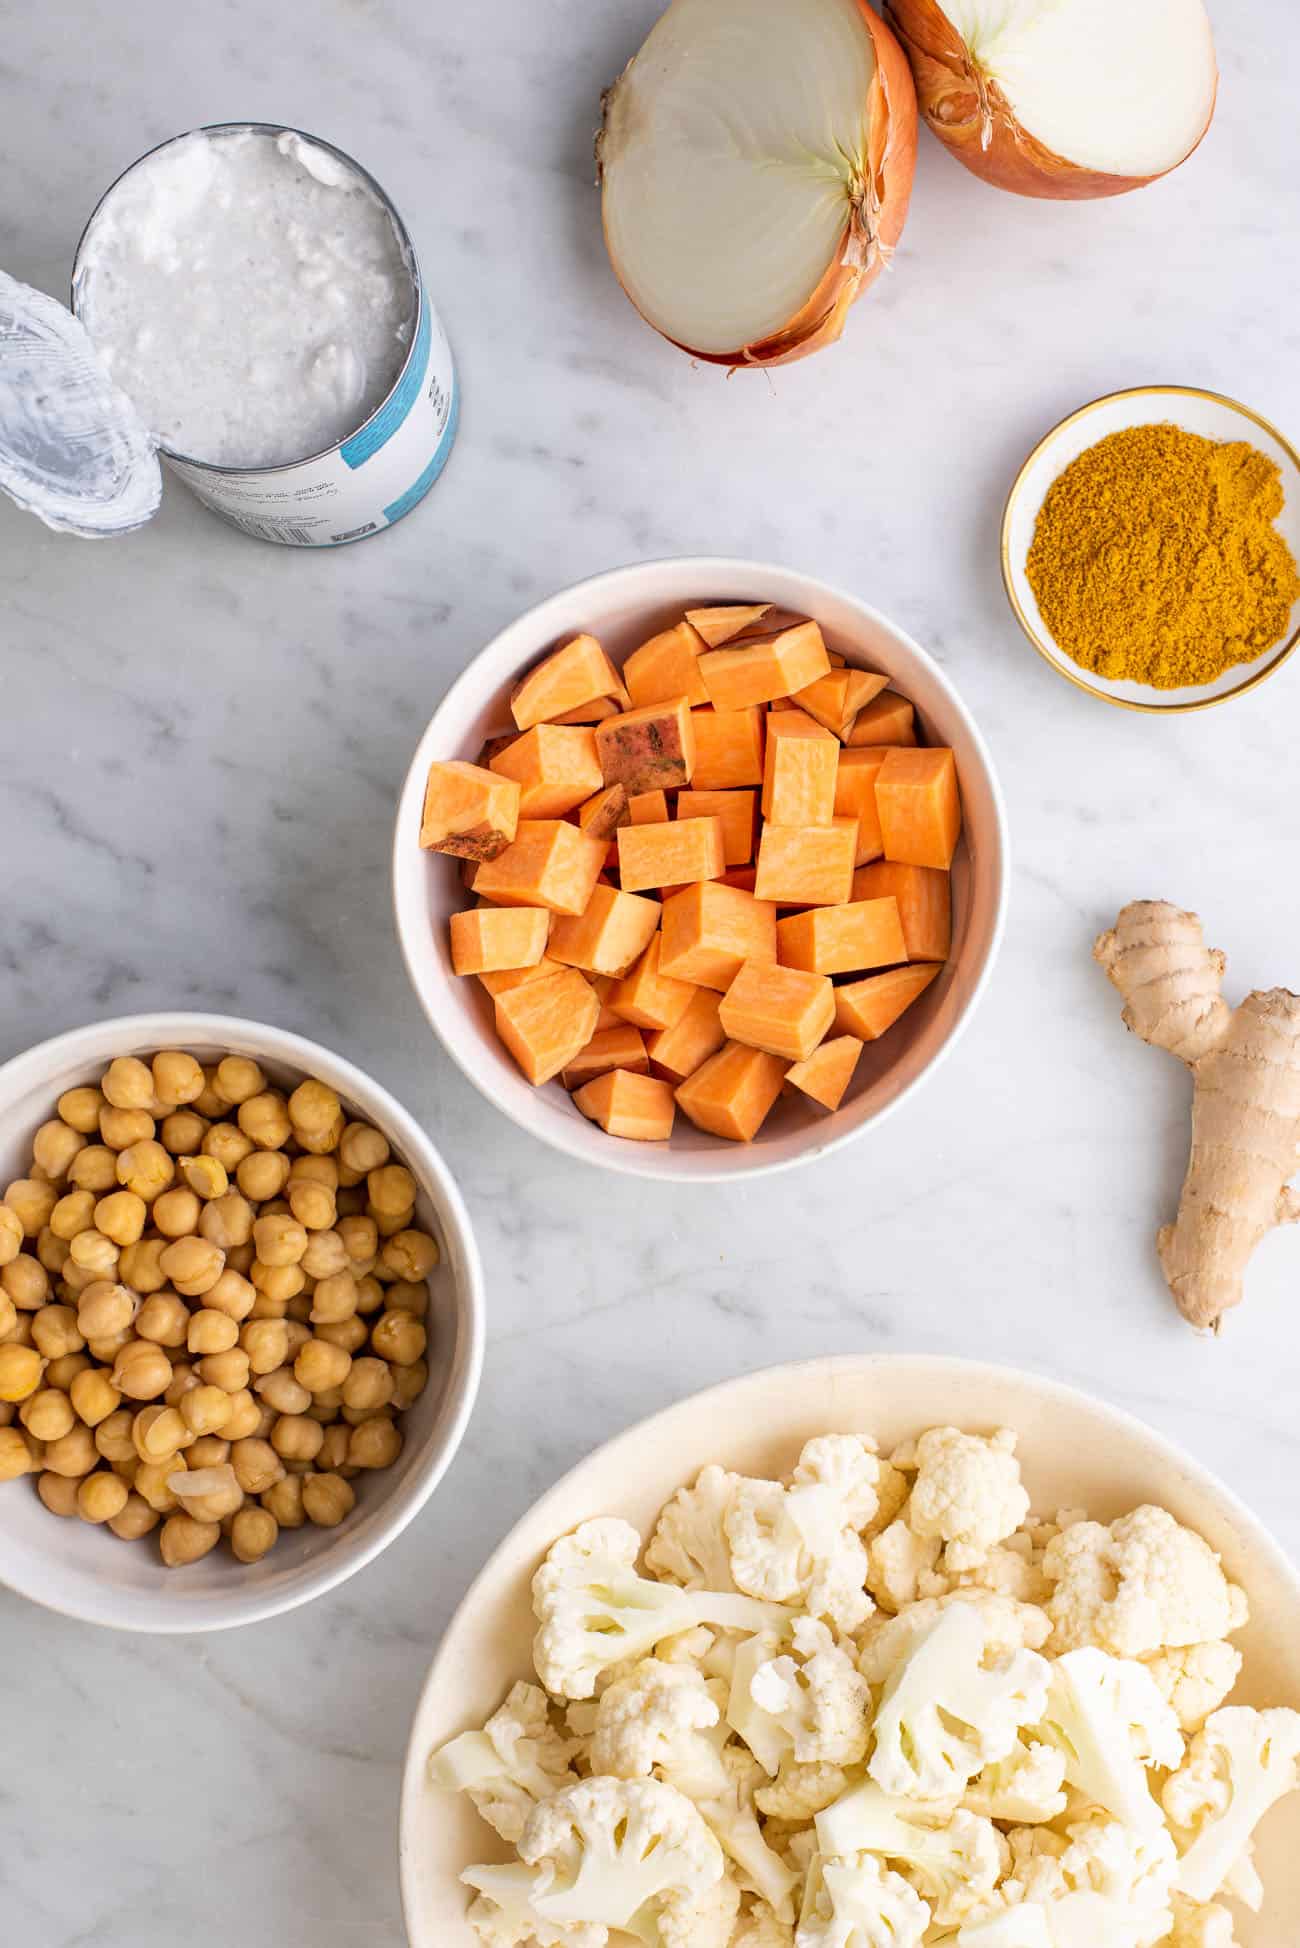 Ingredients to make cauliflower rice curry gathered on a marble table: onion, coconut milk, sweet potatoes, curry powder, chickpeas, cauliflower